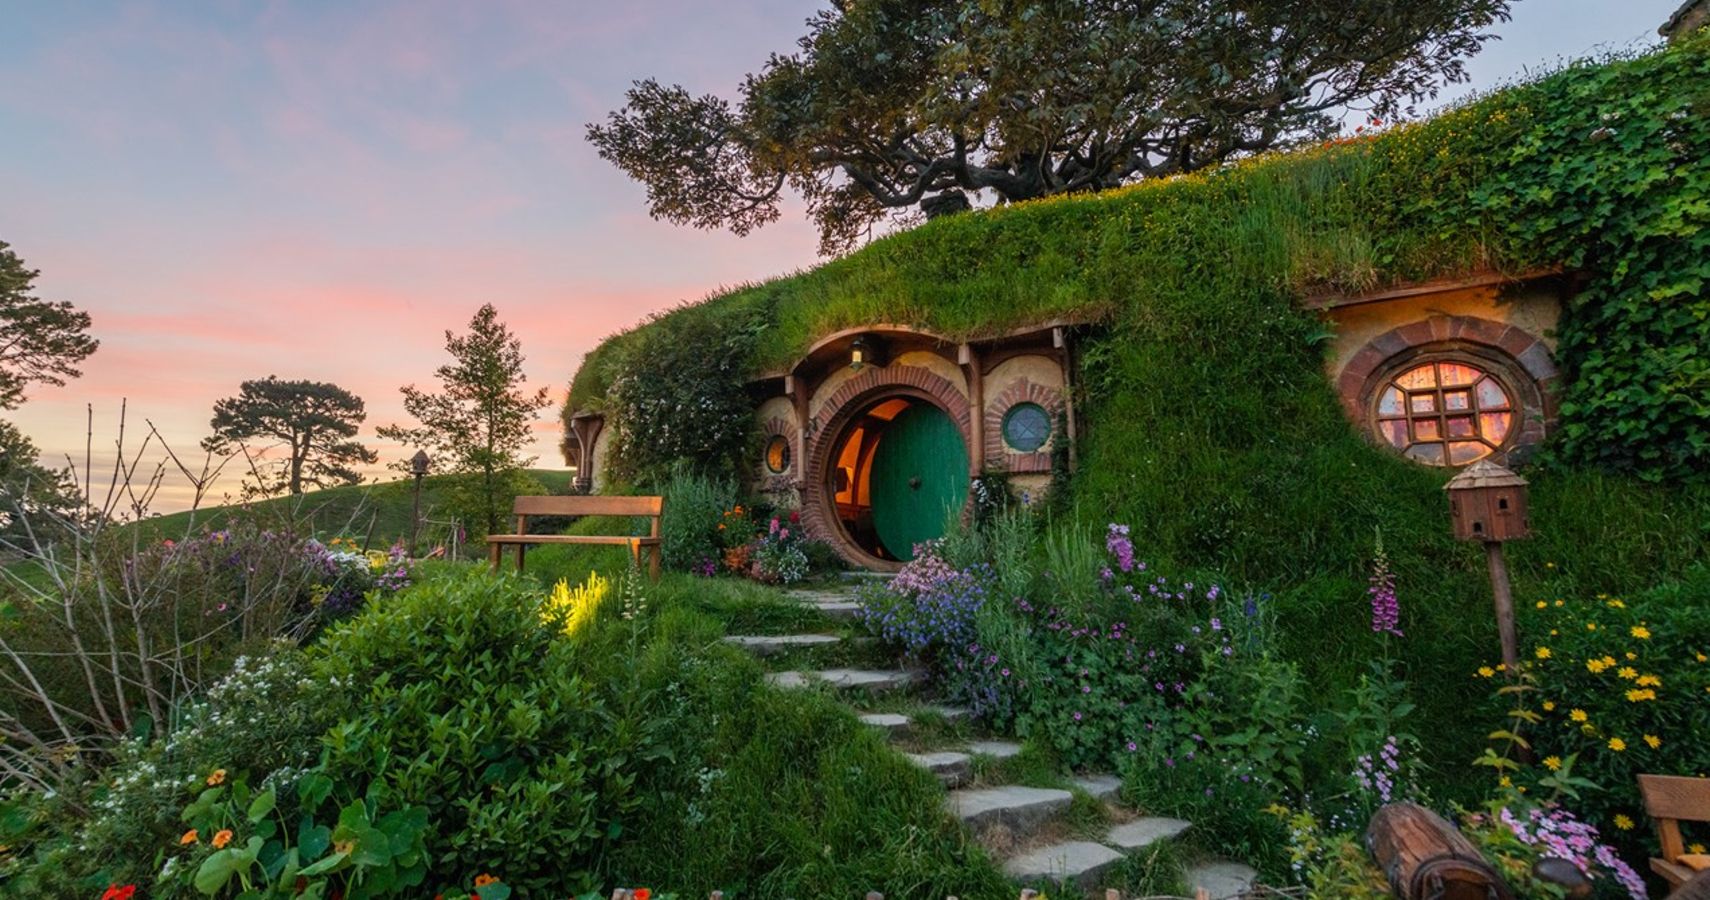 The movie set for Hobbiton in Lord of the Rings and The Hobbit